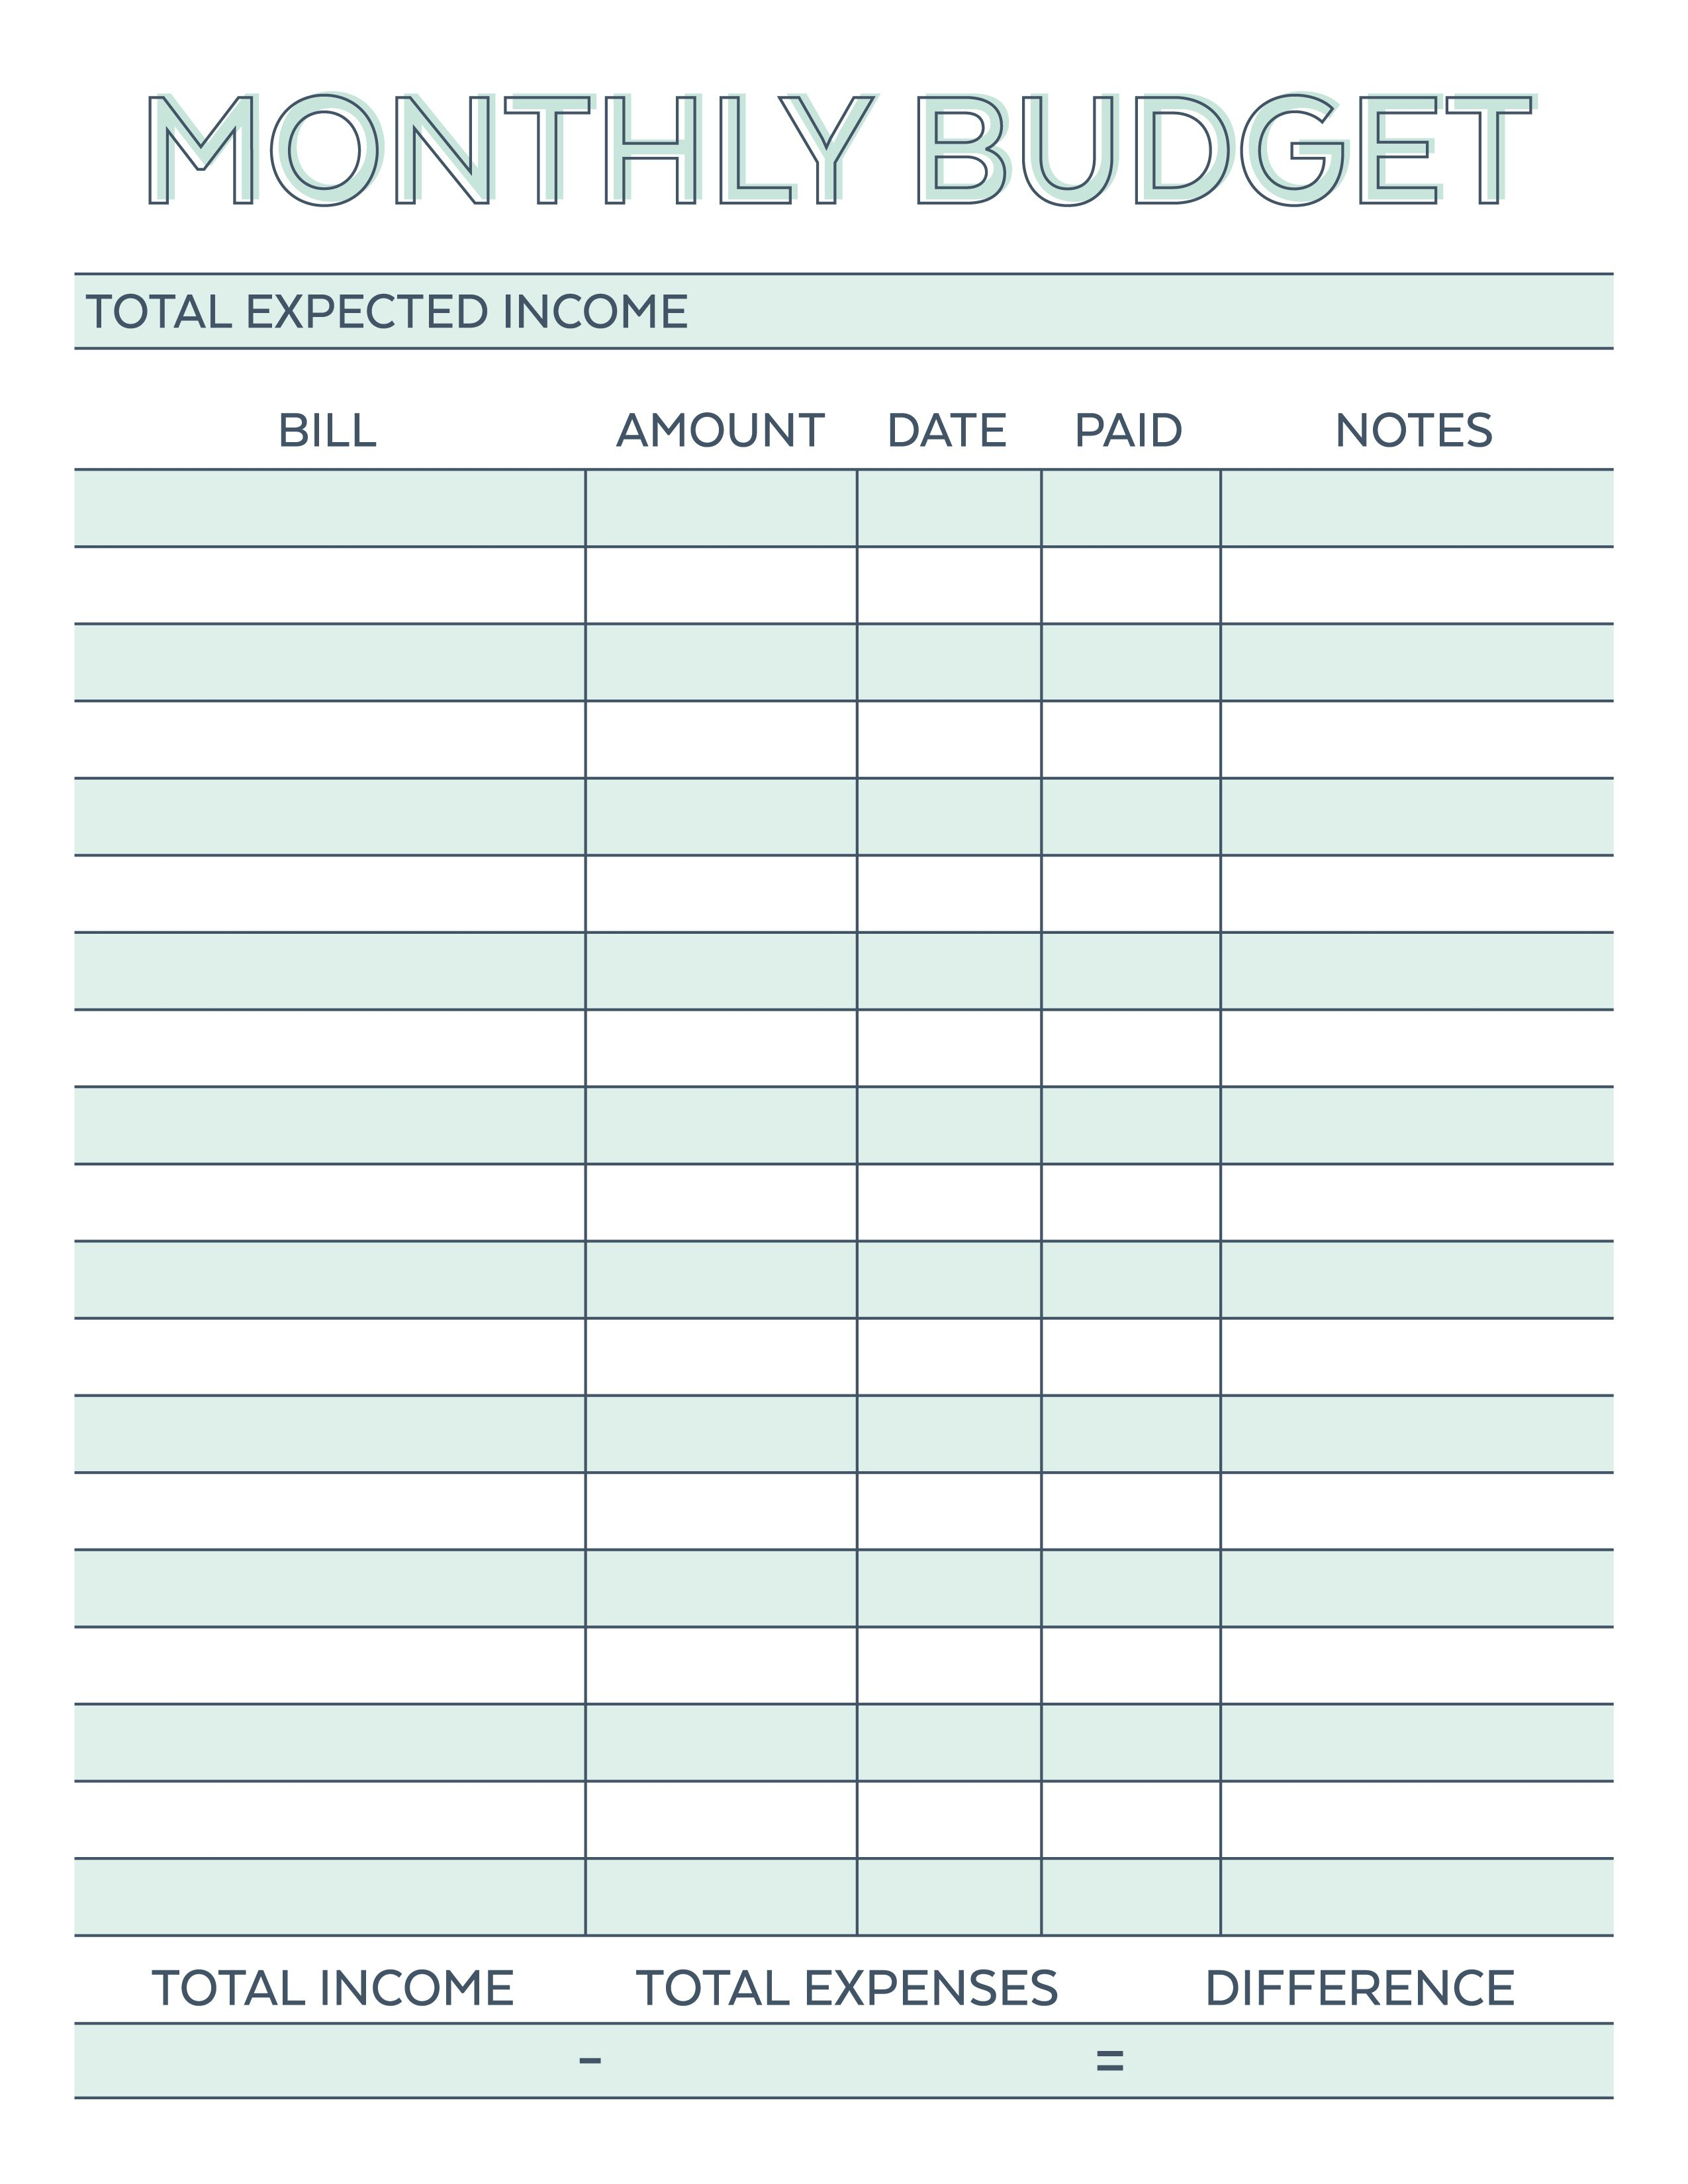 Free Printable Monthly Budget Planner Worksheet - Koran.sticken.co | Free Printable Monthly Budget Worksheets